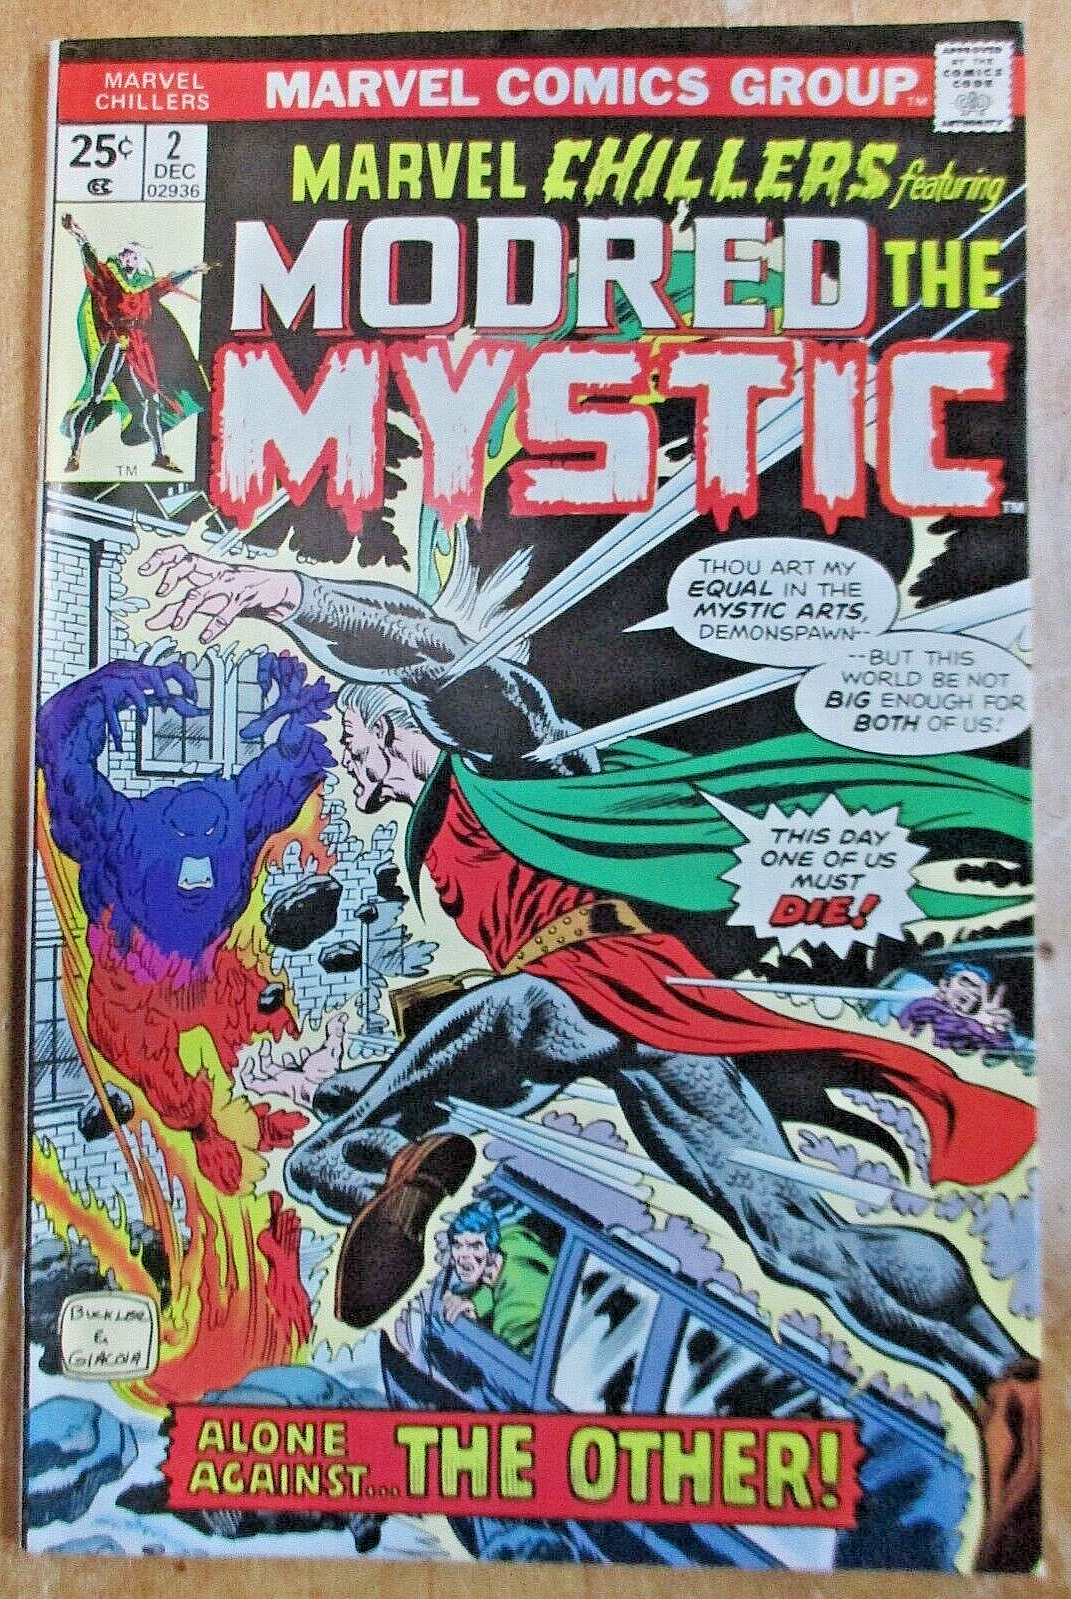 MARVEL CHILLERS #2 Featuring  MODRED THE MYSTIC Art by John Bryne 1975 VF/NM